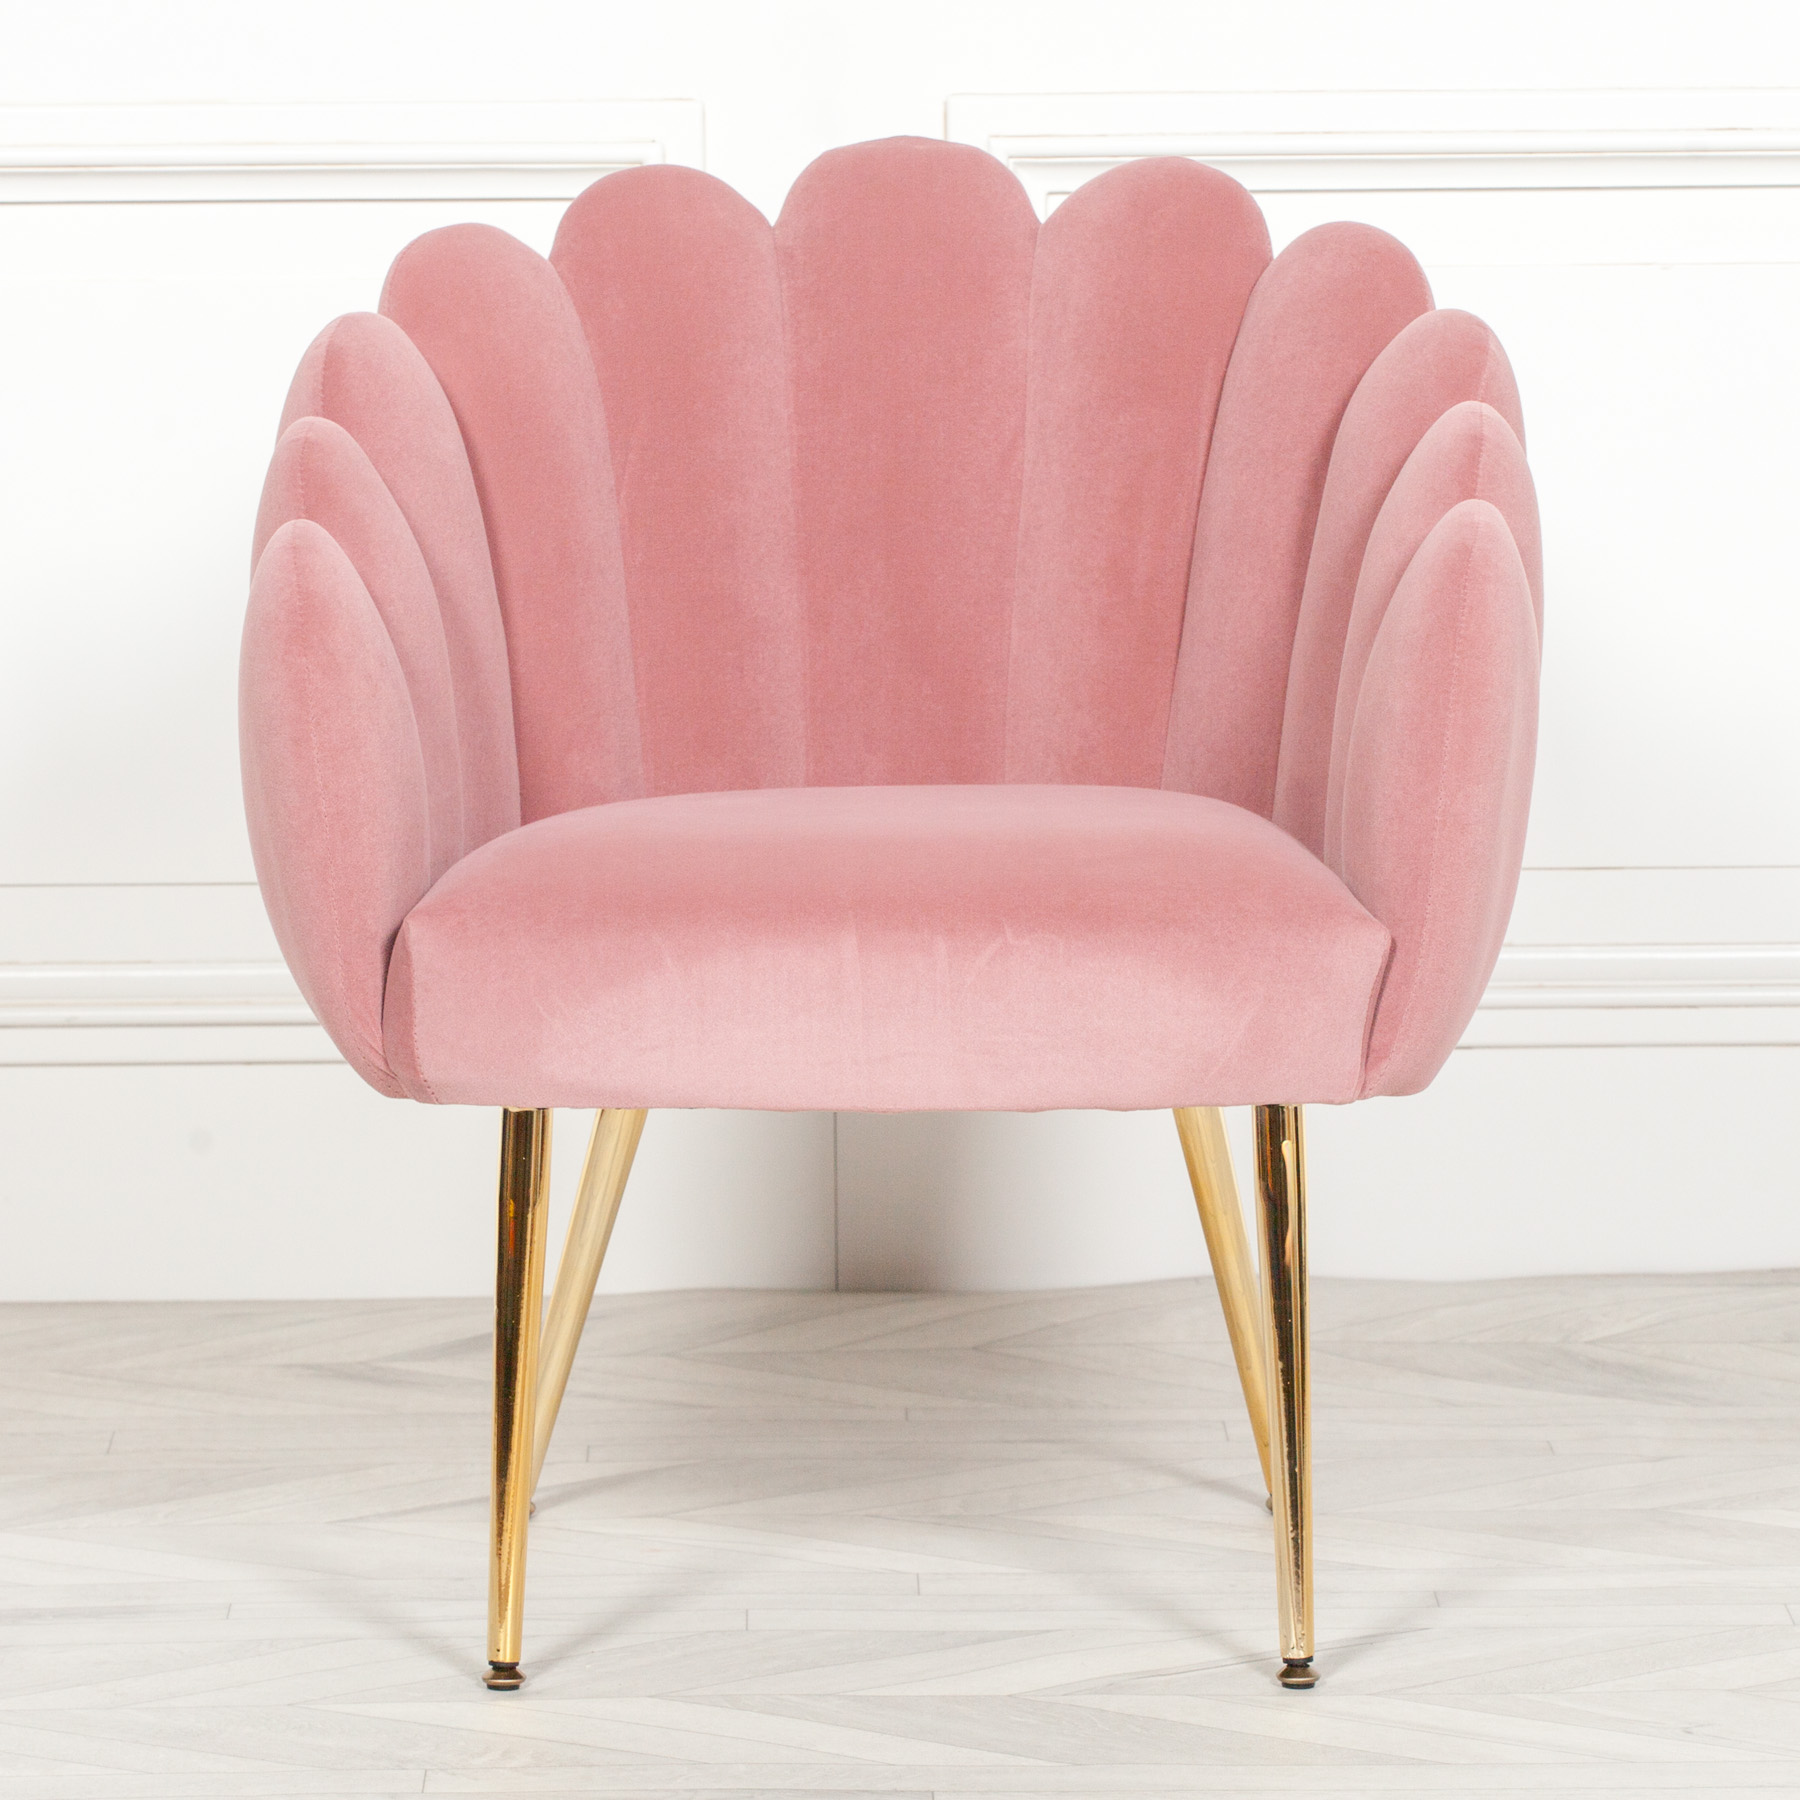 Deco Pink Dining / Bedroom Chair Maison Reproductions